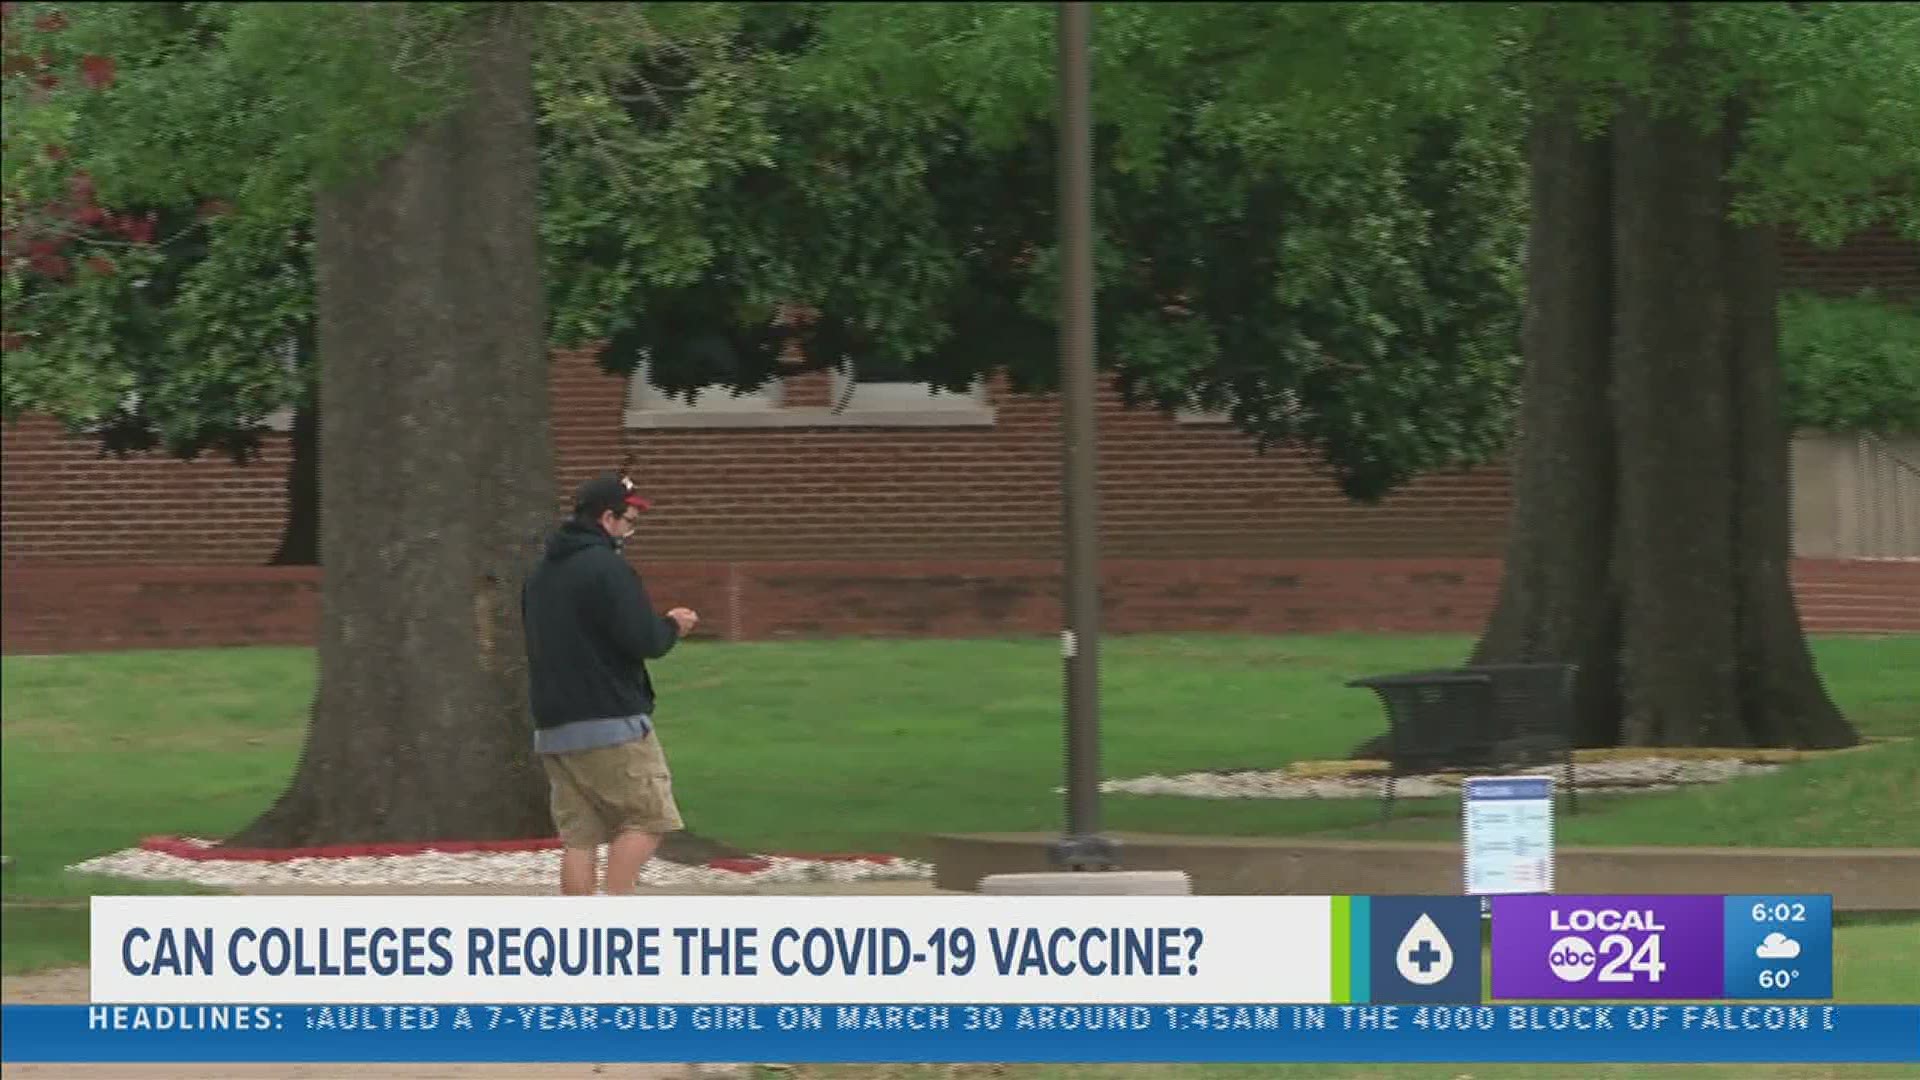 Colleges nationwide are divided on whether to require vaccinations for the coronavirus.